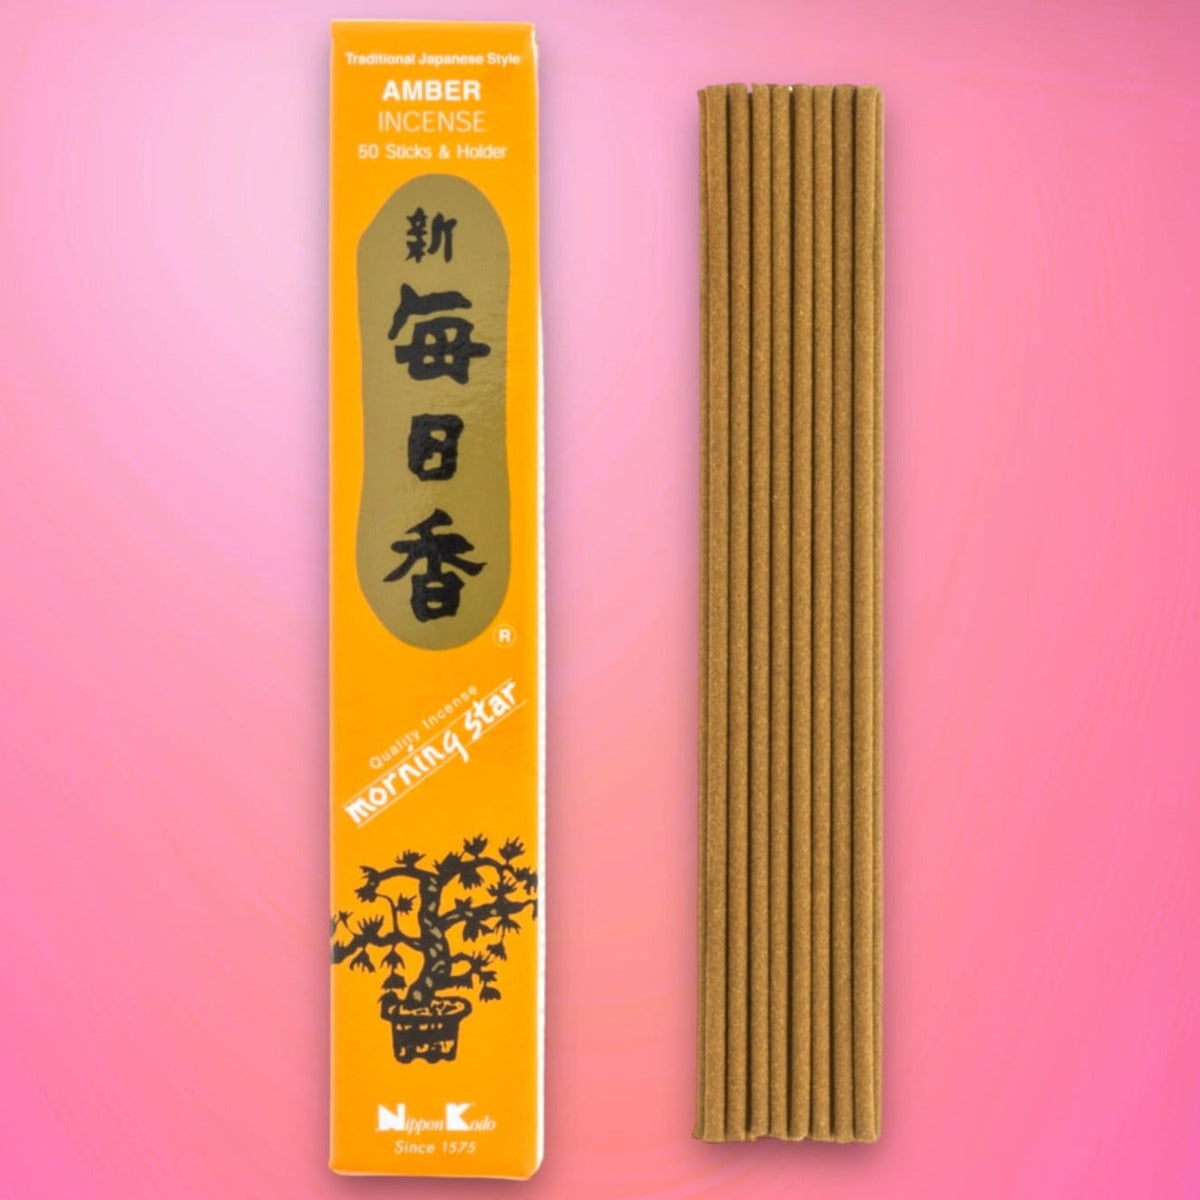 Morning Star Incense 50 Sticks - Amber 0923 - Groupbycolor -